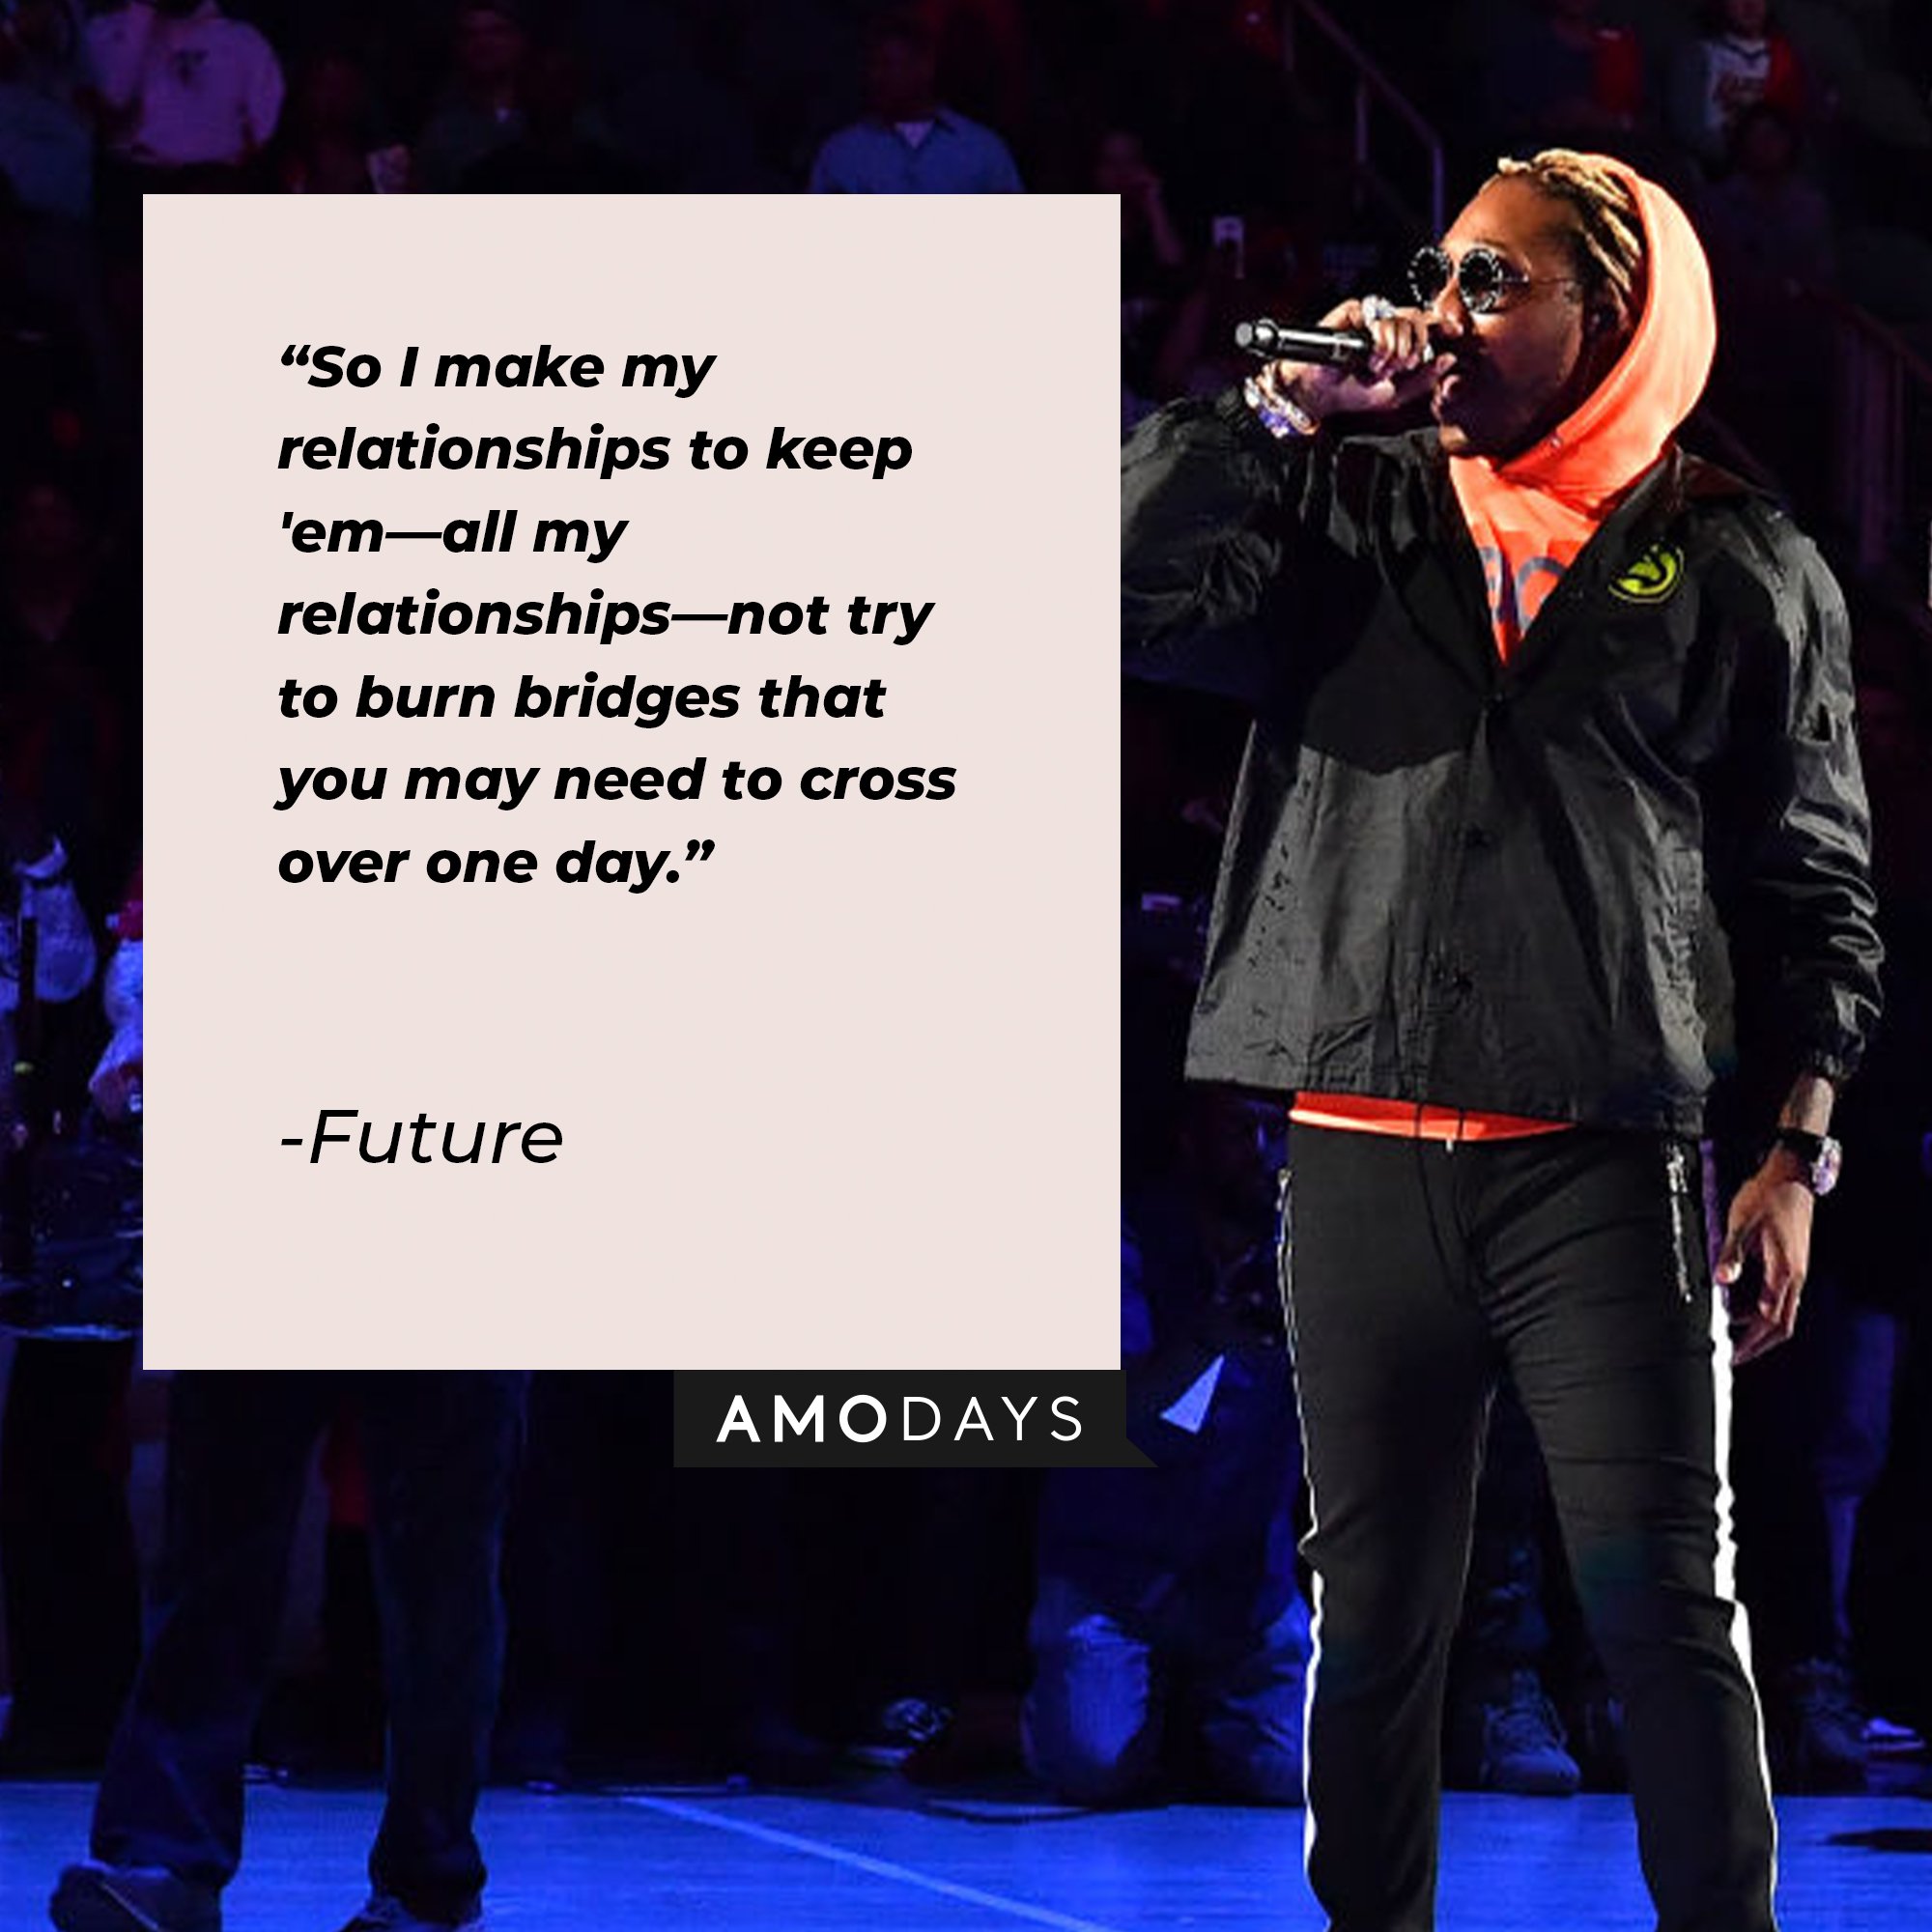 Future’s quote: "So I make my relationships to keep 'em—all my relationships—not try to burn bridges that you may need to cross over one day." | Image: AmoDays